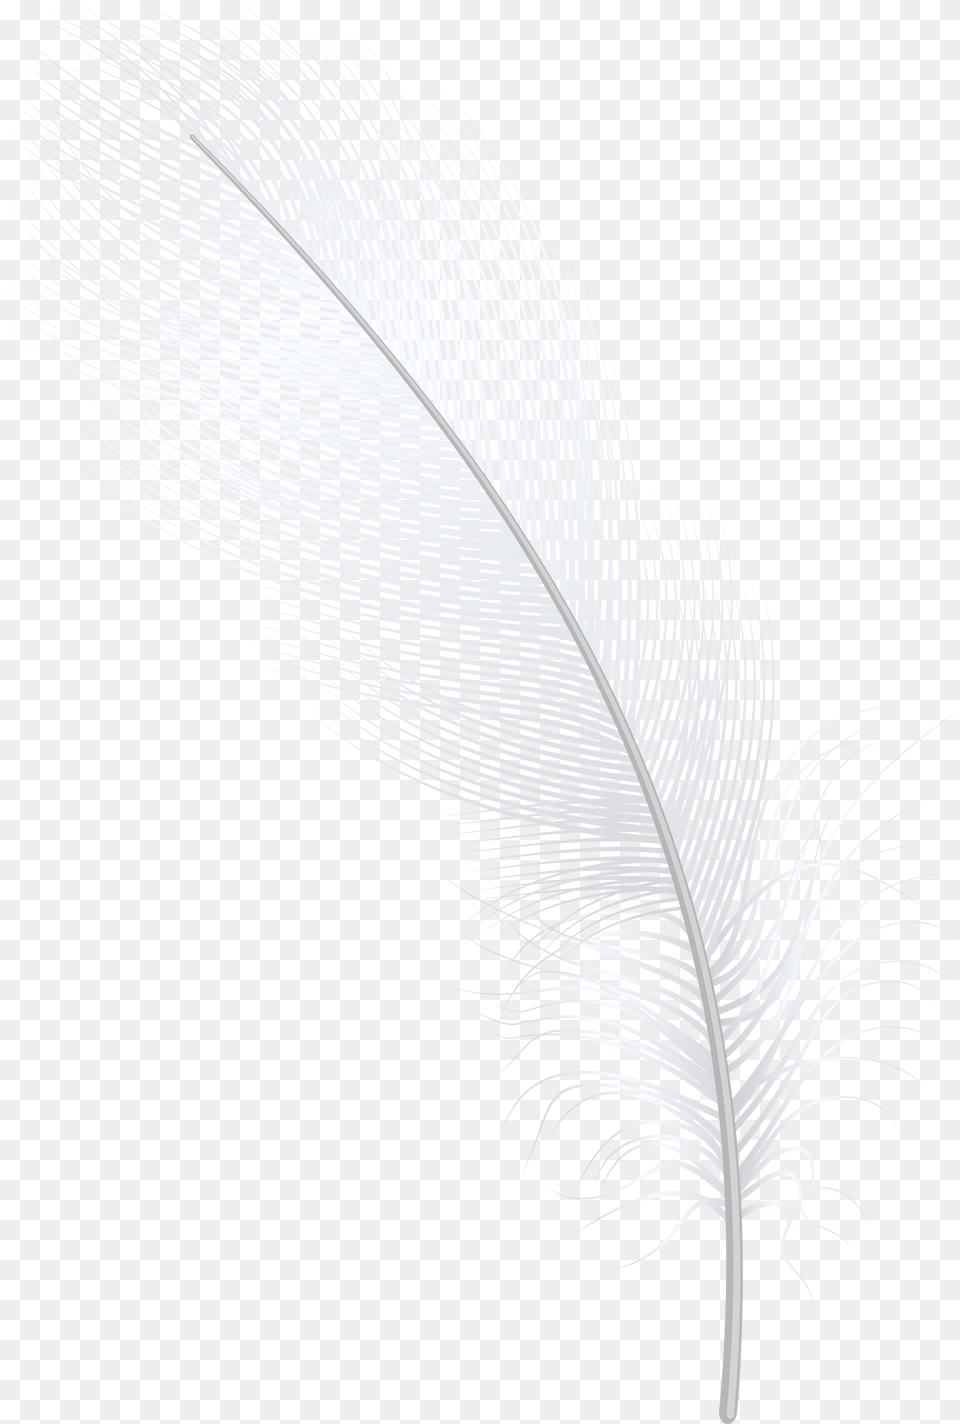 White Feathers Darkness Download Original Size Animal Product, Art, Leaf, Plant, Accessories Png Image